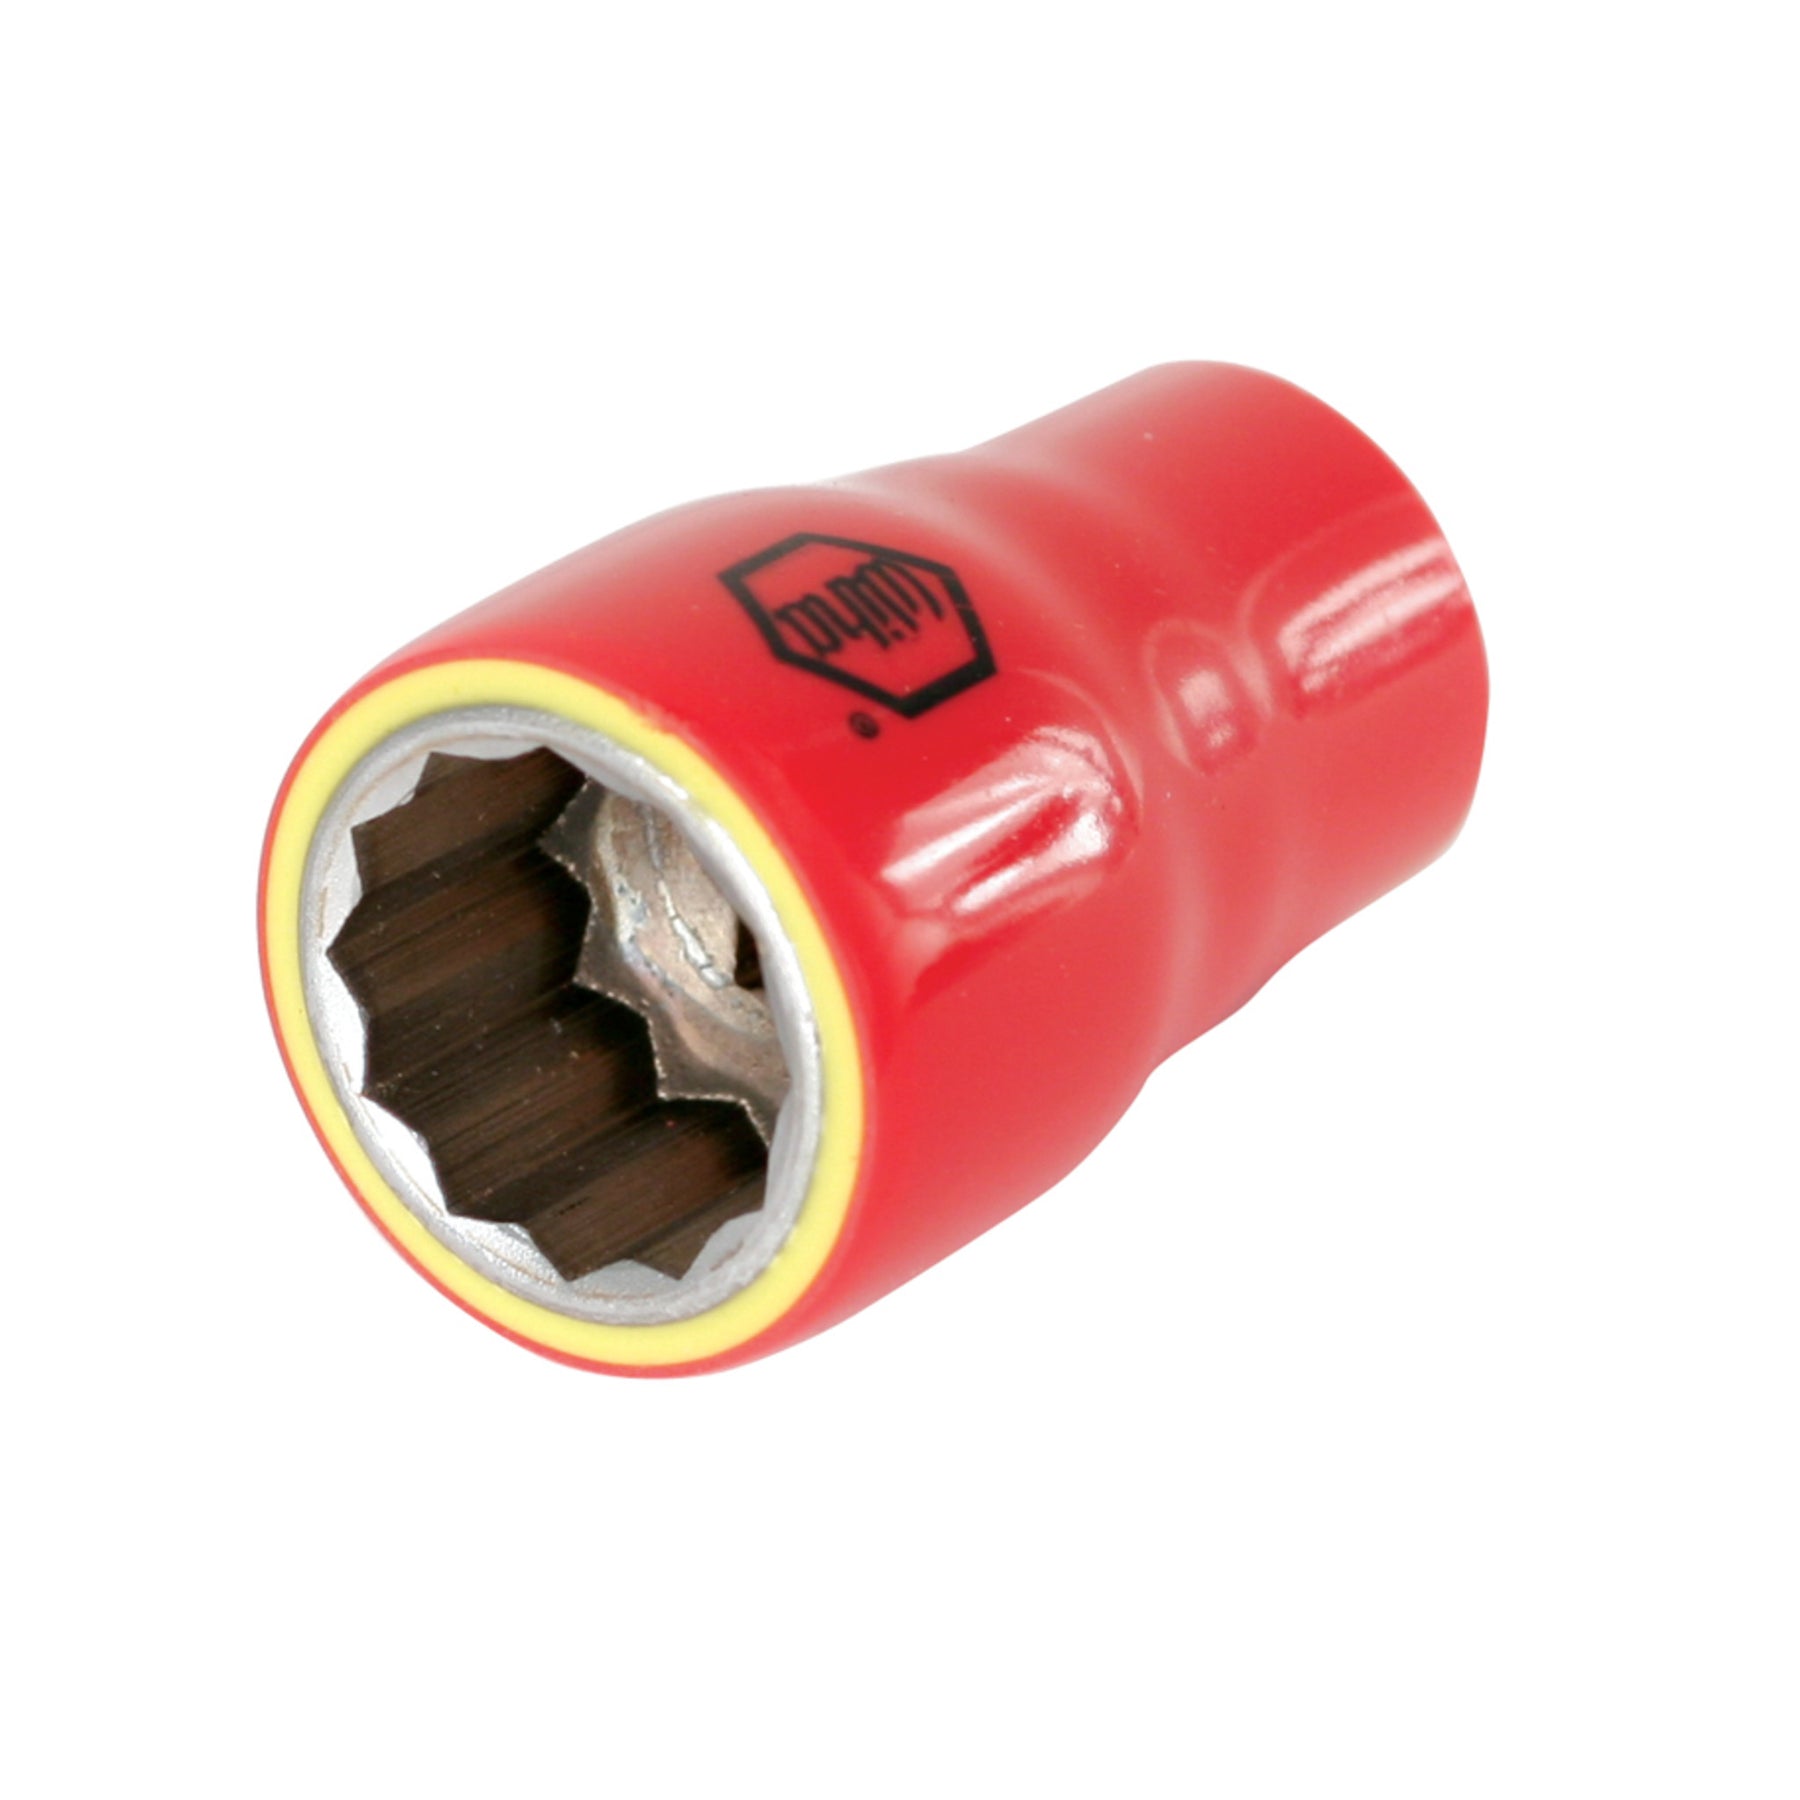 Insulated Socket 1/2" Drive 11/16"